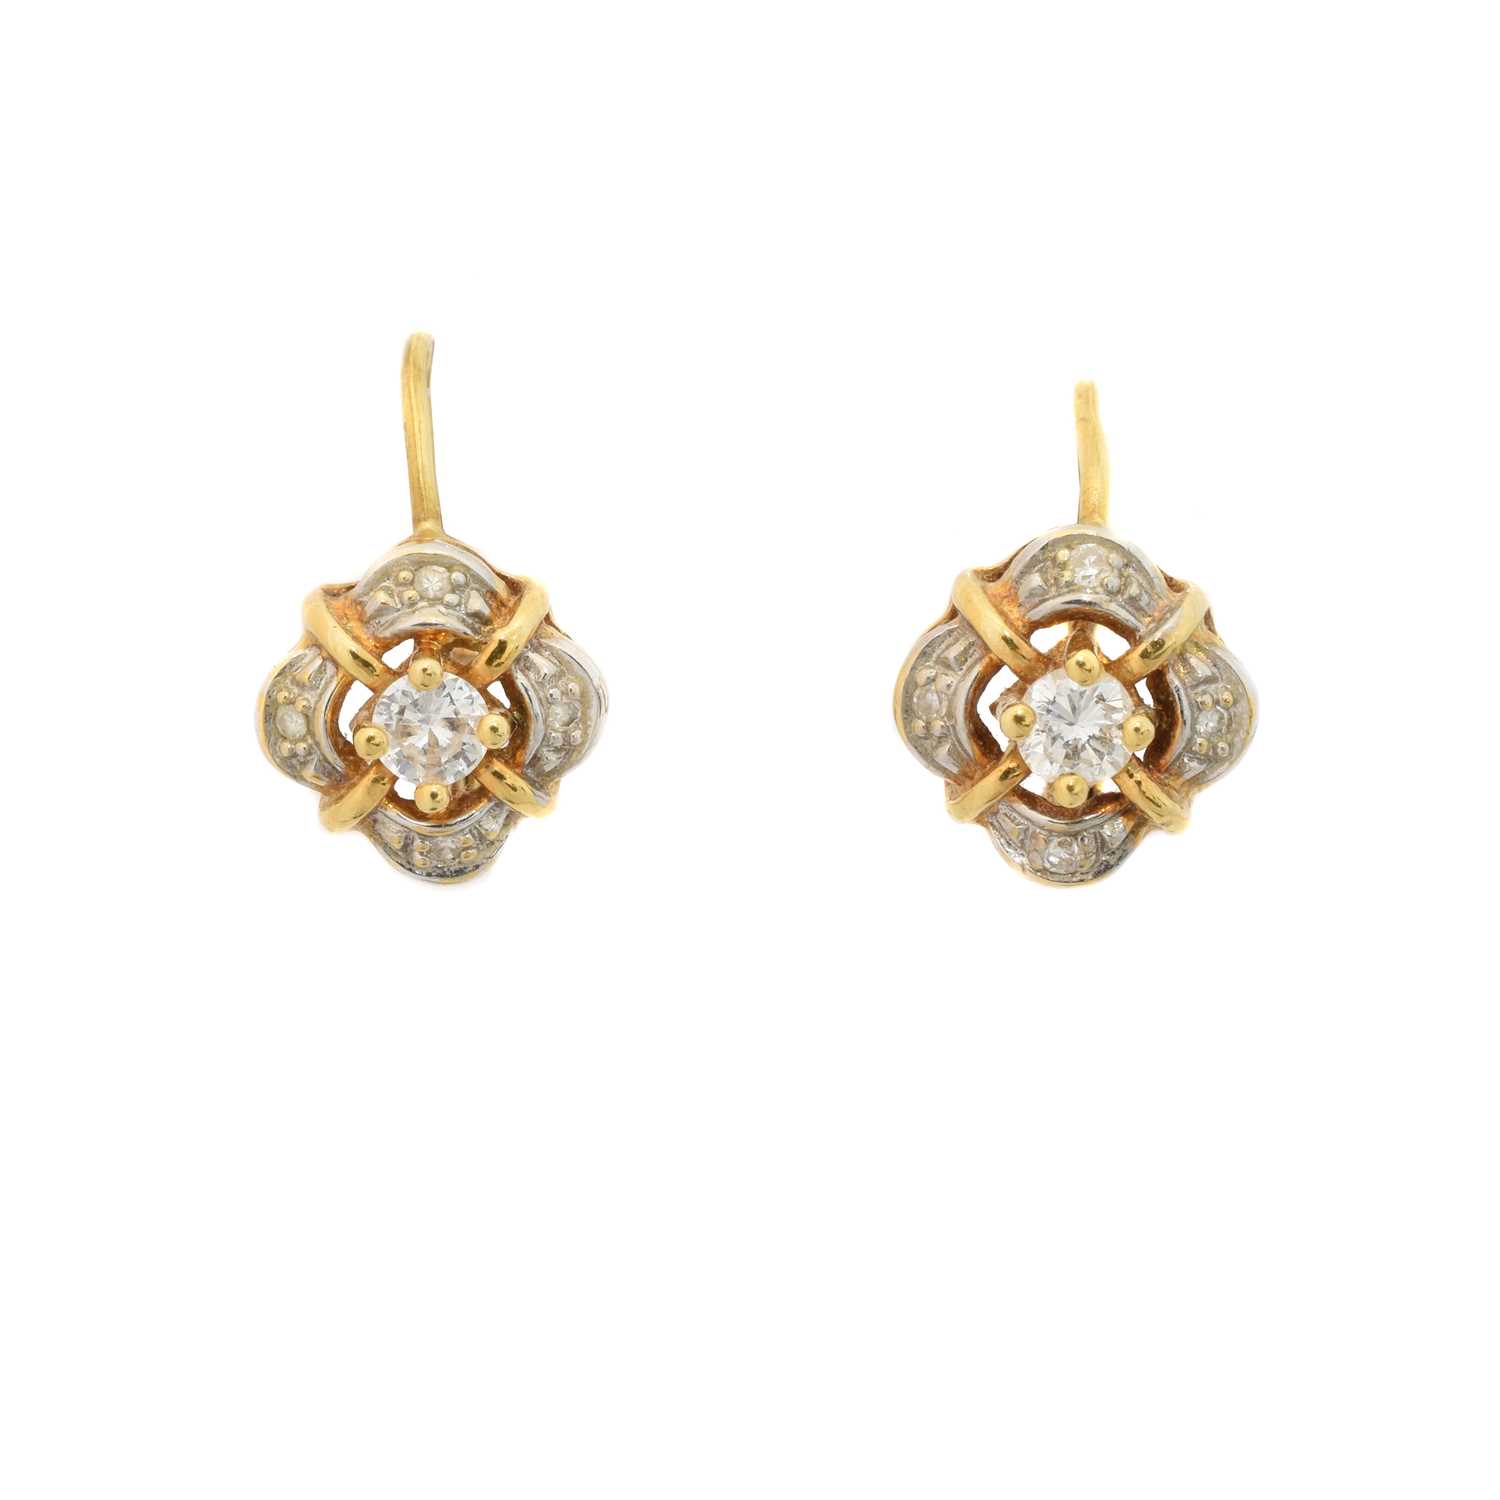 Lot 20 - A pair of 18ct gold diamond earrings